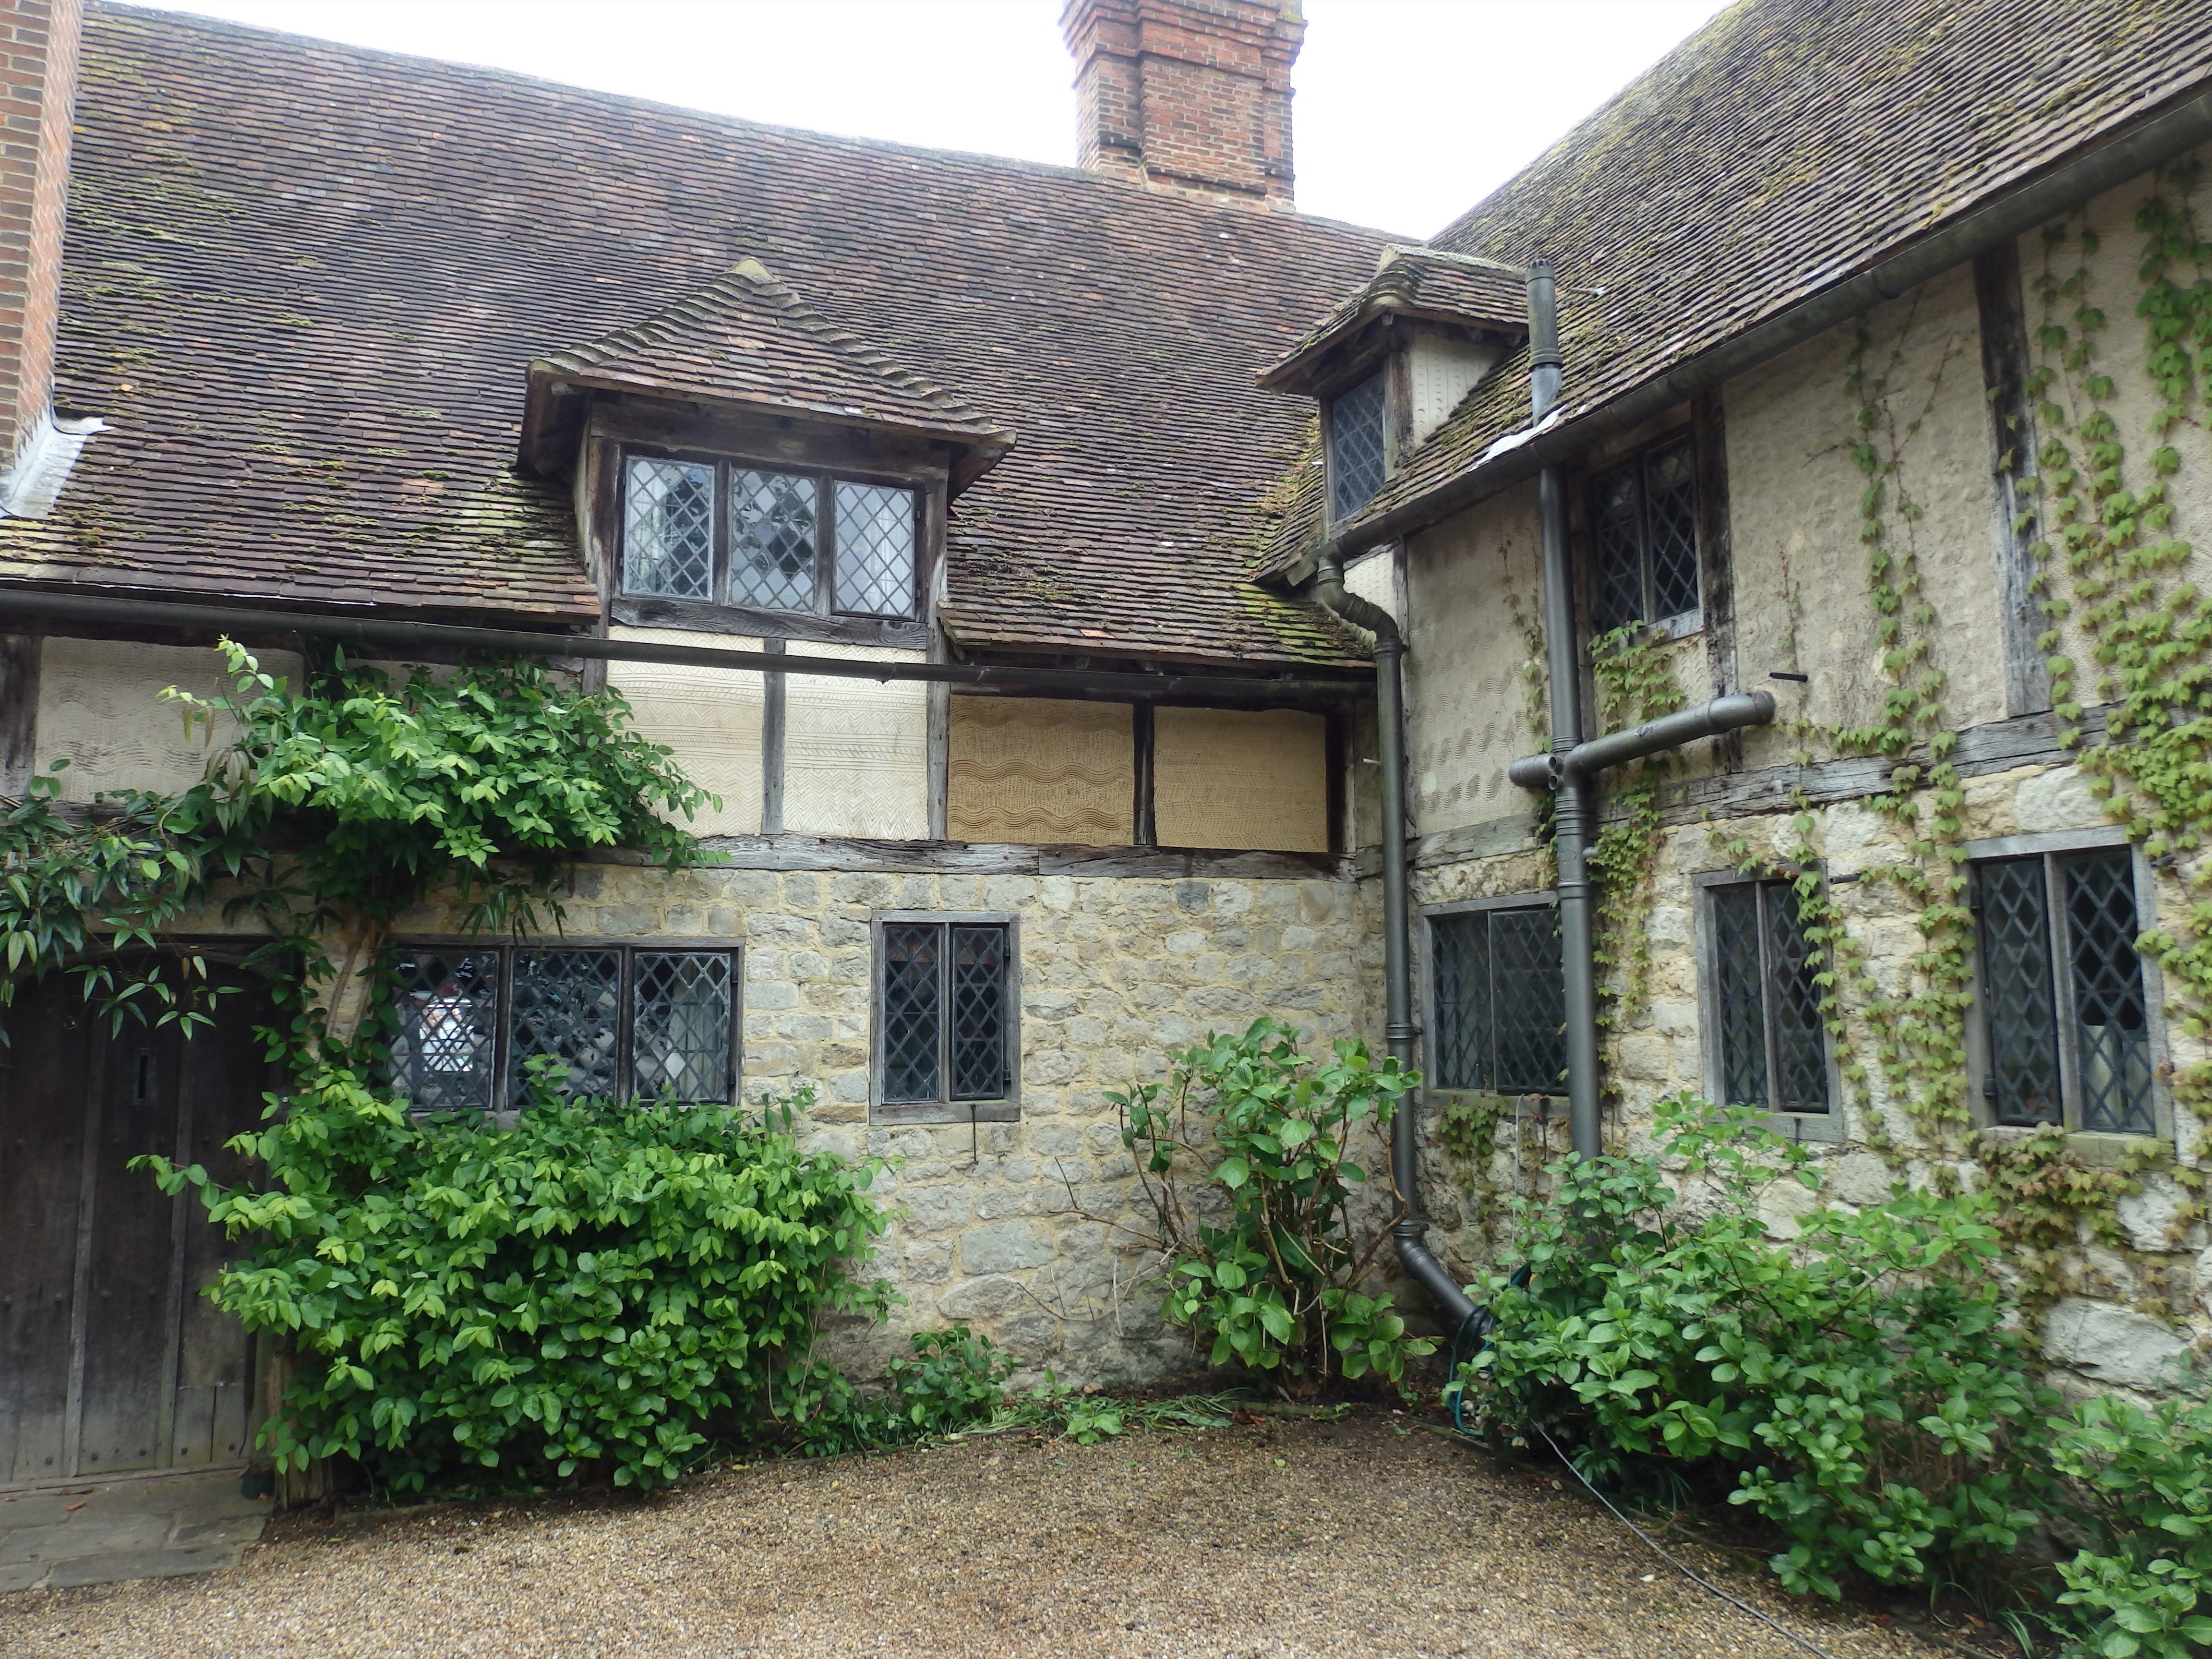 Otham Manor. A Grade 1 listed property, dating around 1370. Lime rendered panels repaired with markings, to match the original panels.